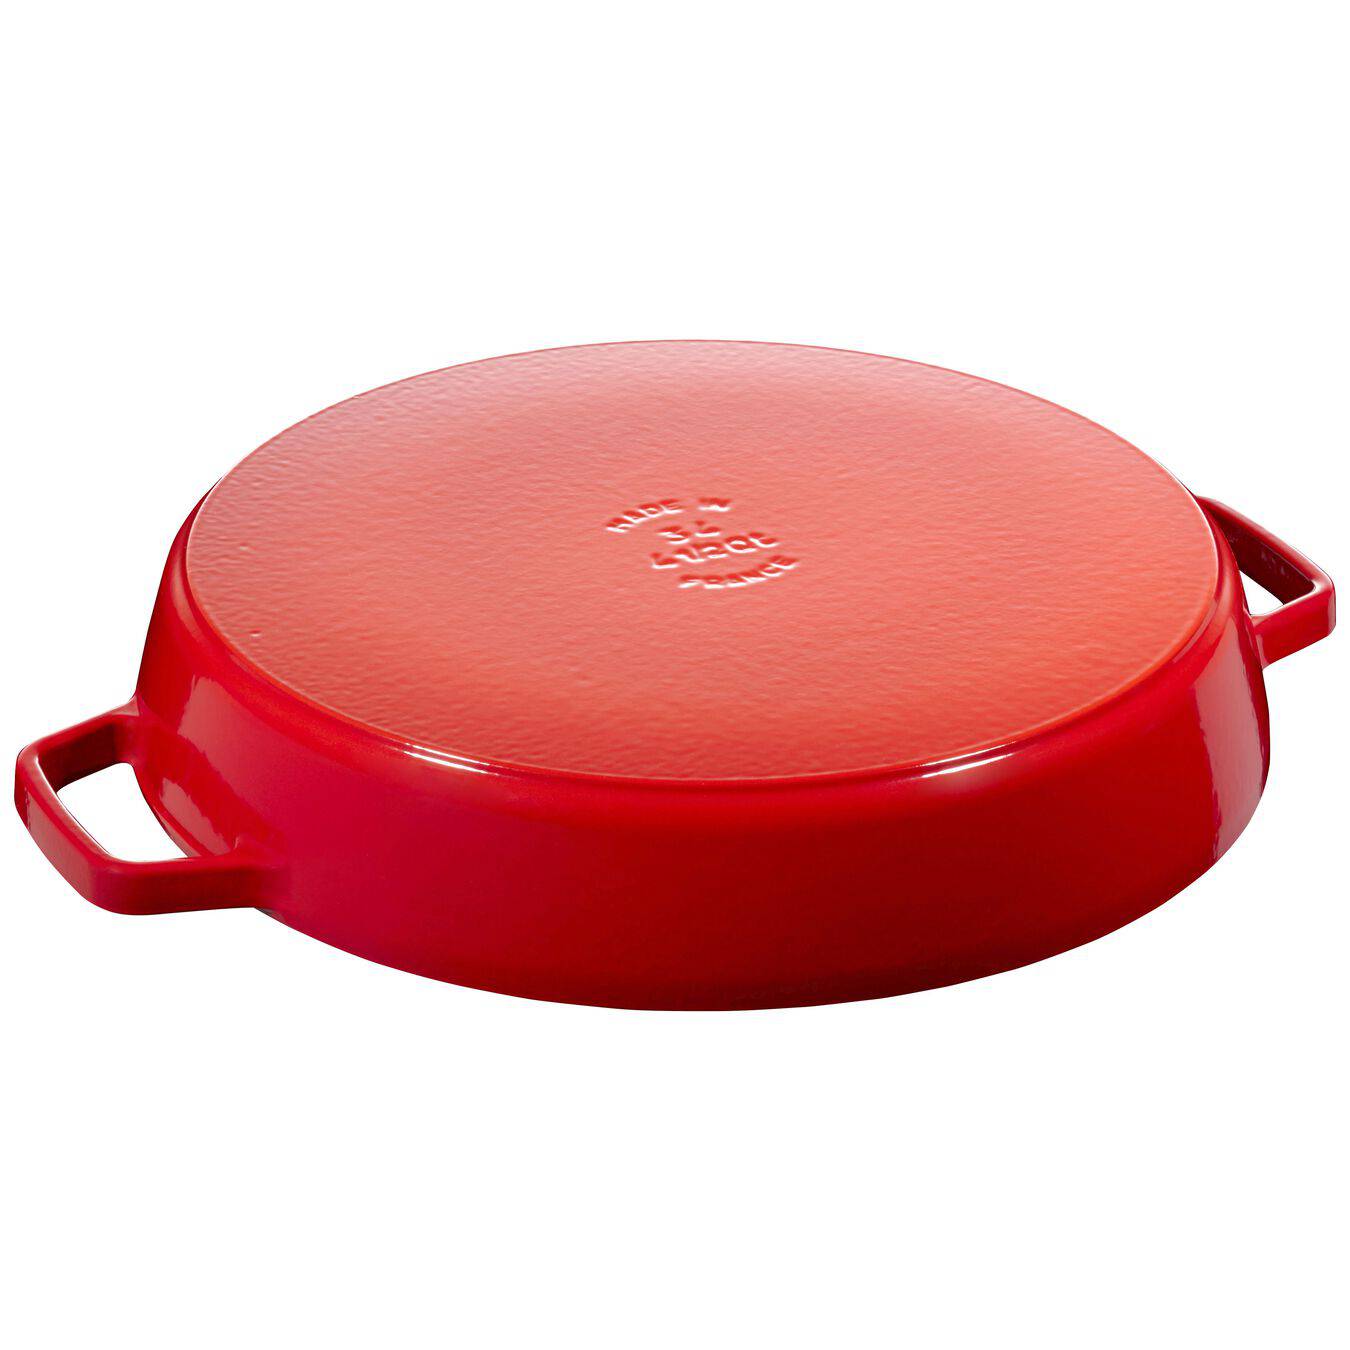 Staub Cast Iron Fry Pan Double Handle, 13-in, Cherry Red - Kitchen Universe